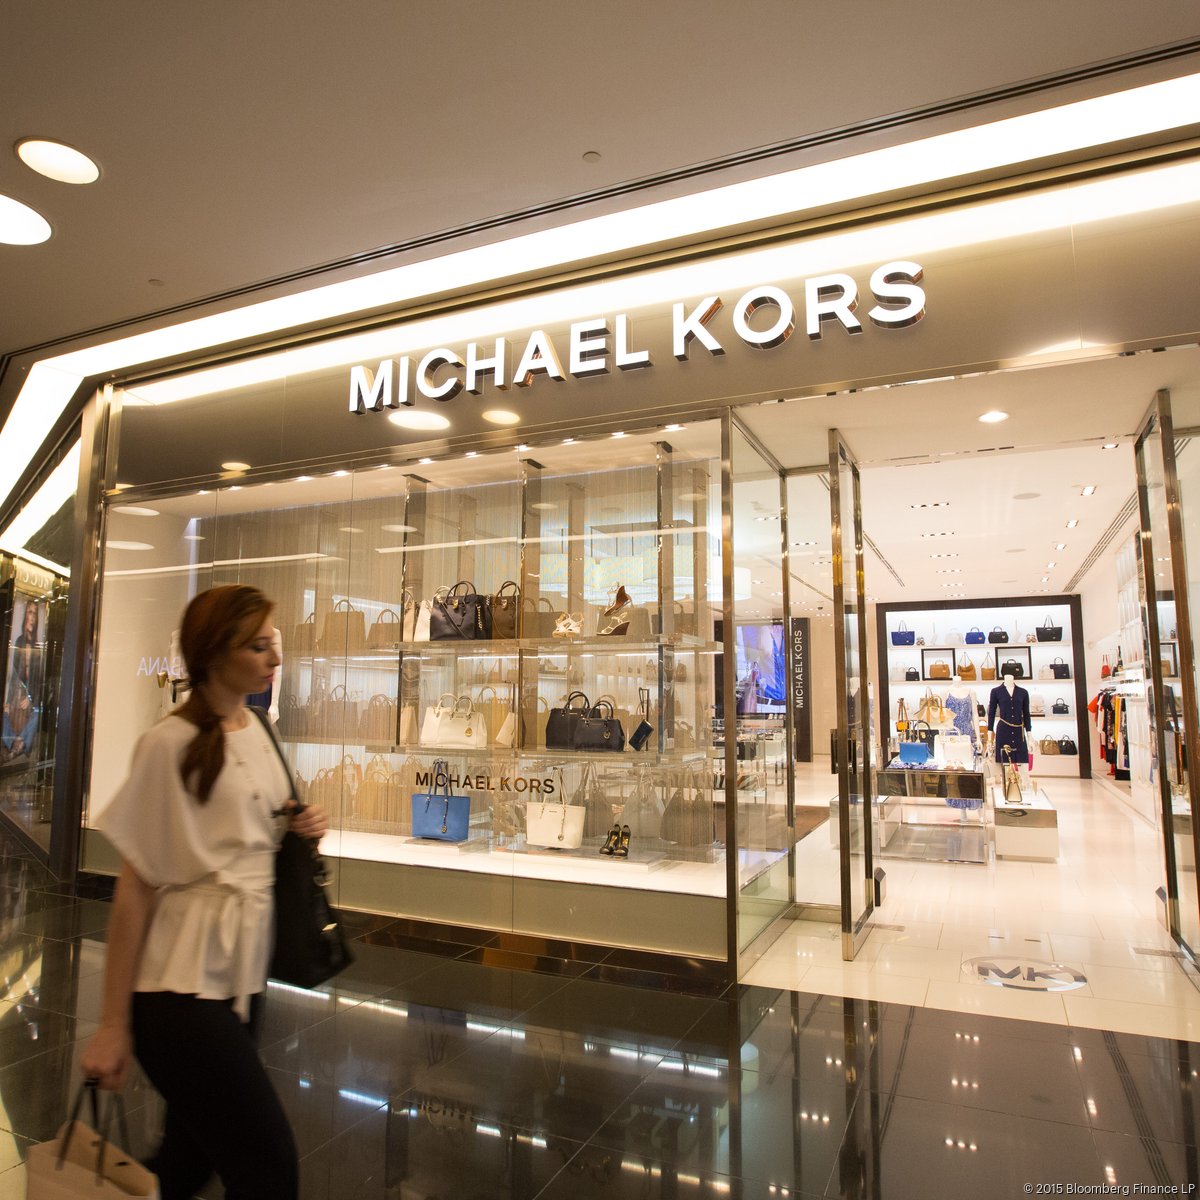 Michael Kors Stores in Orlando and Miami